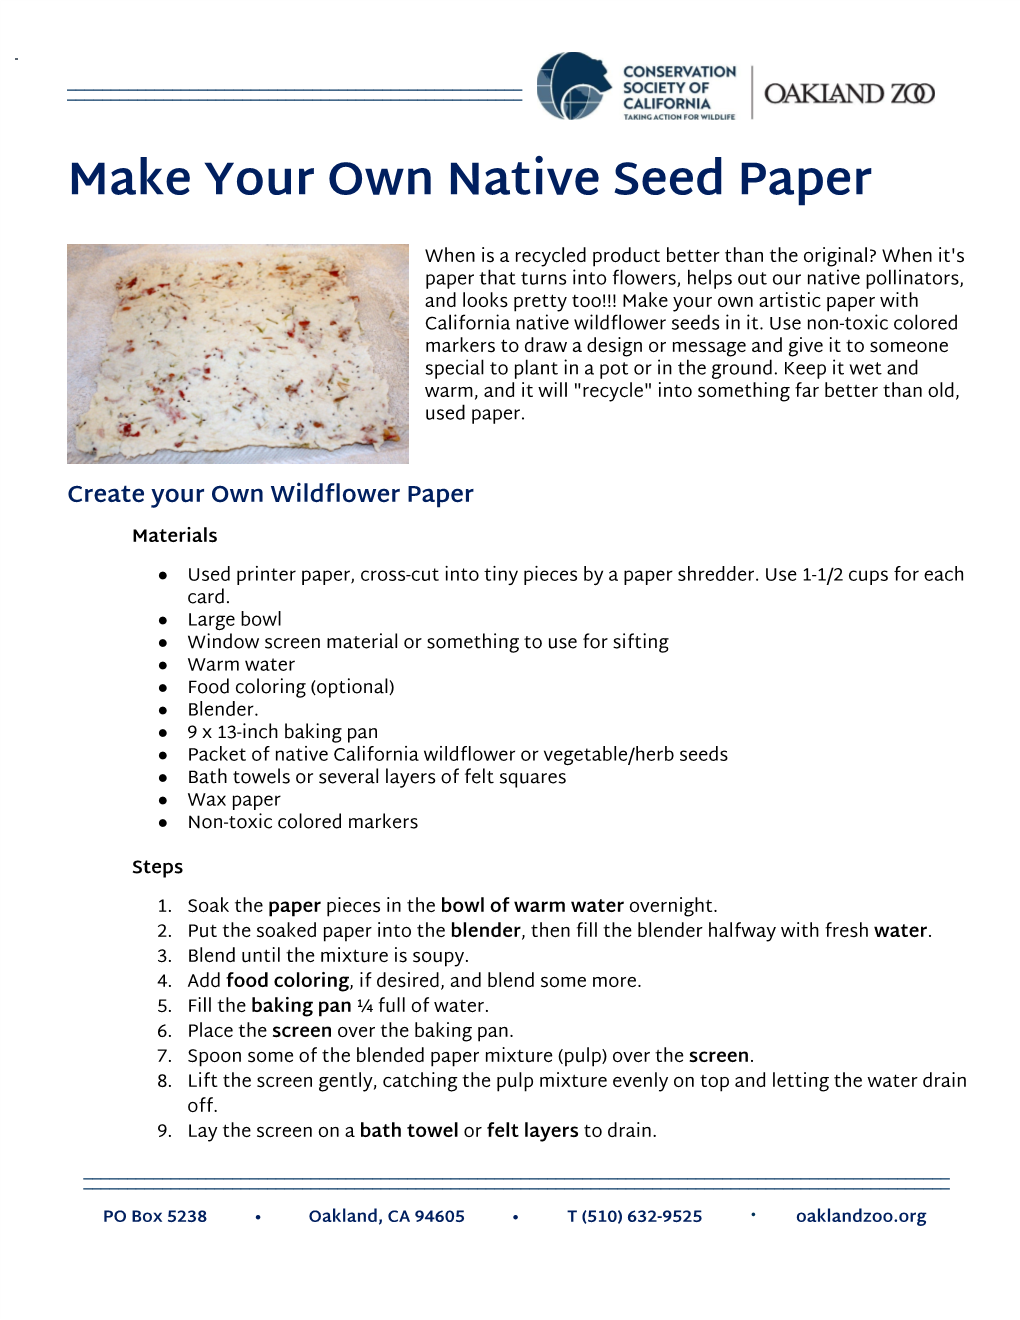 Make Your Own Native Seed Paper